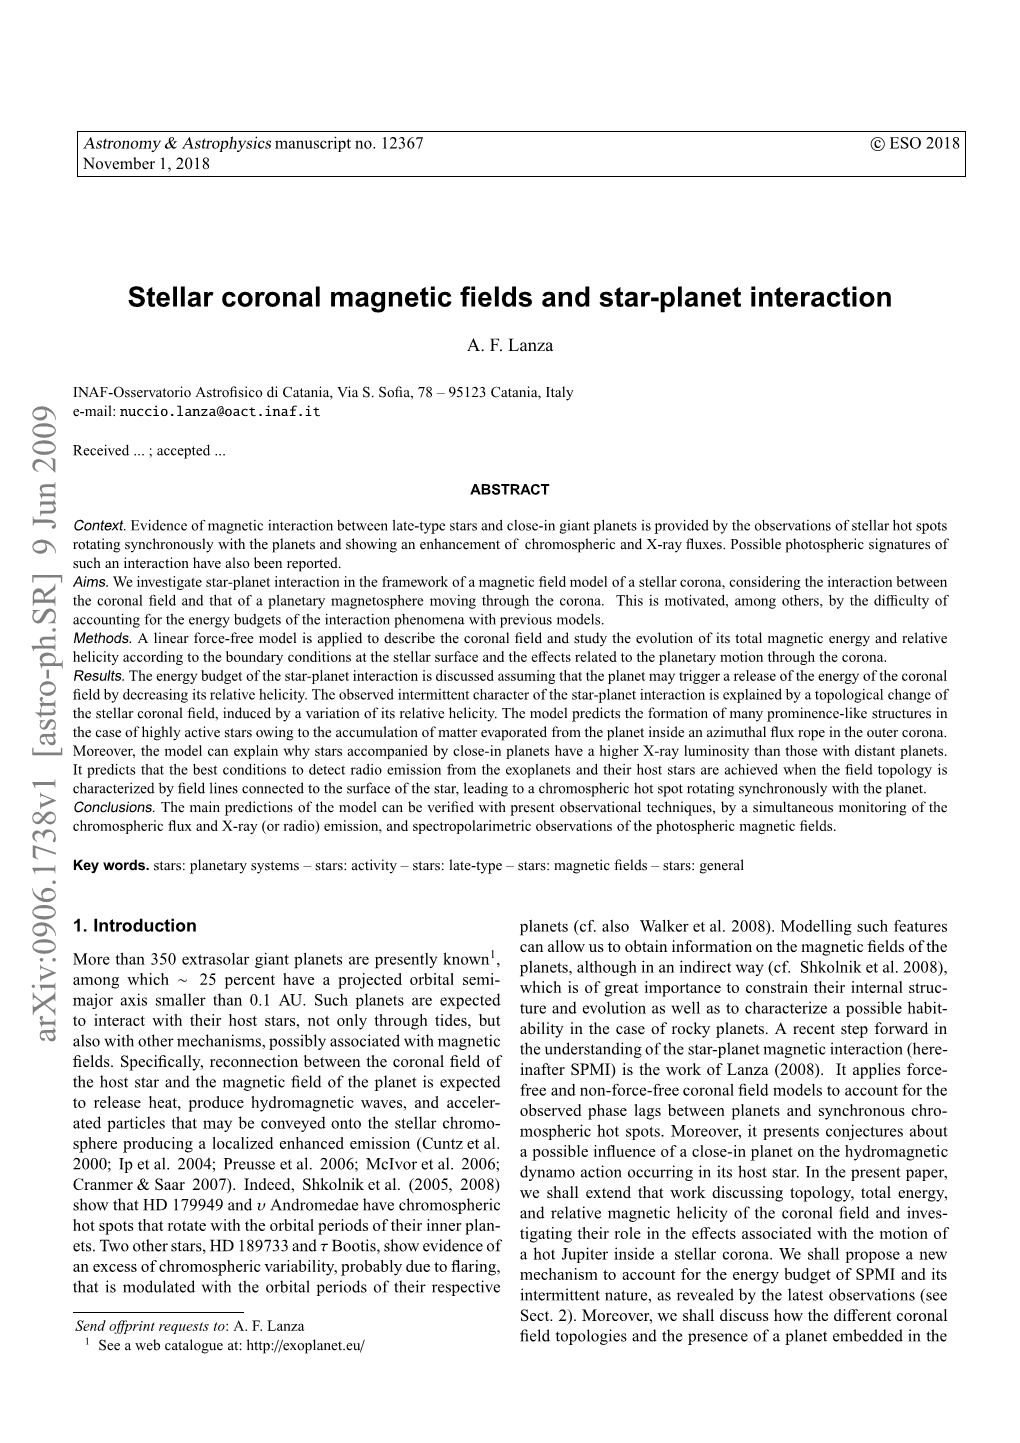 Stellar Coronal Magnetic Fields and Star-Planet Interaction